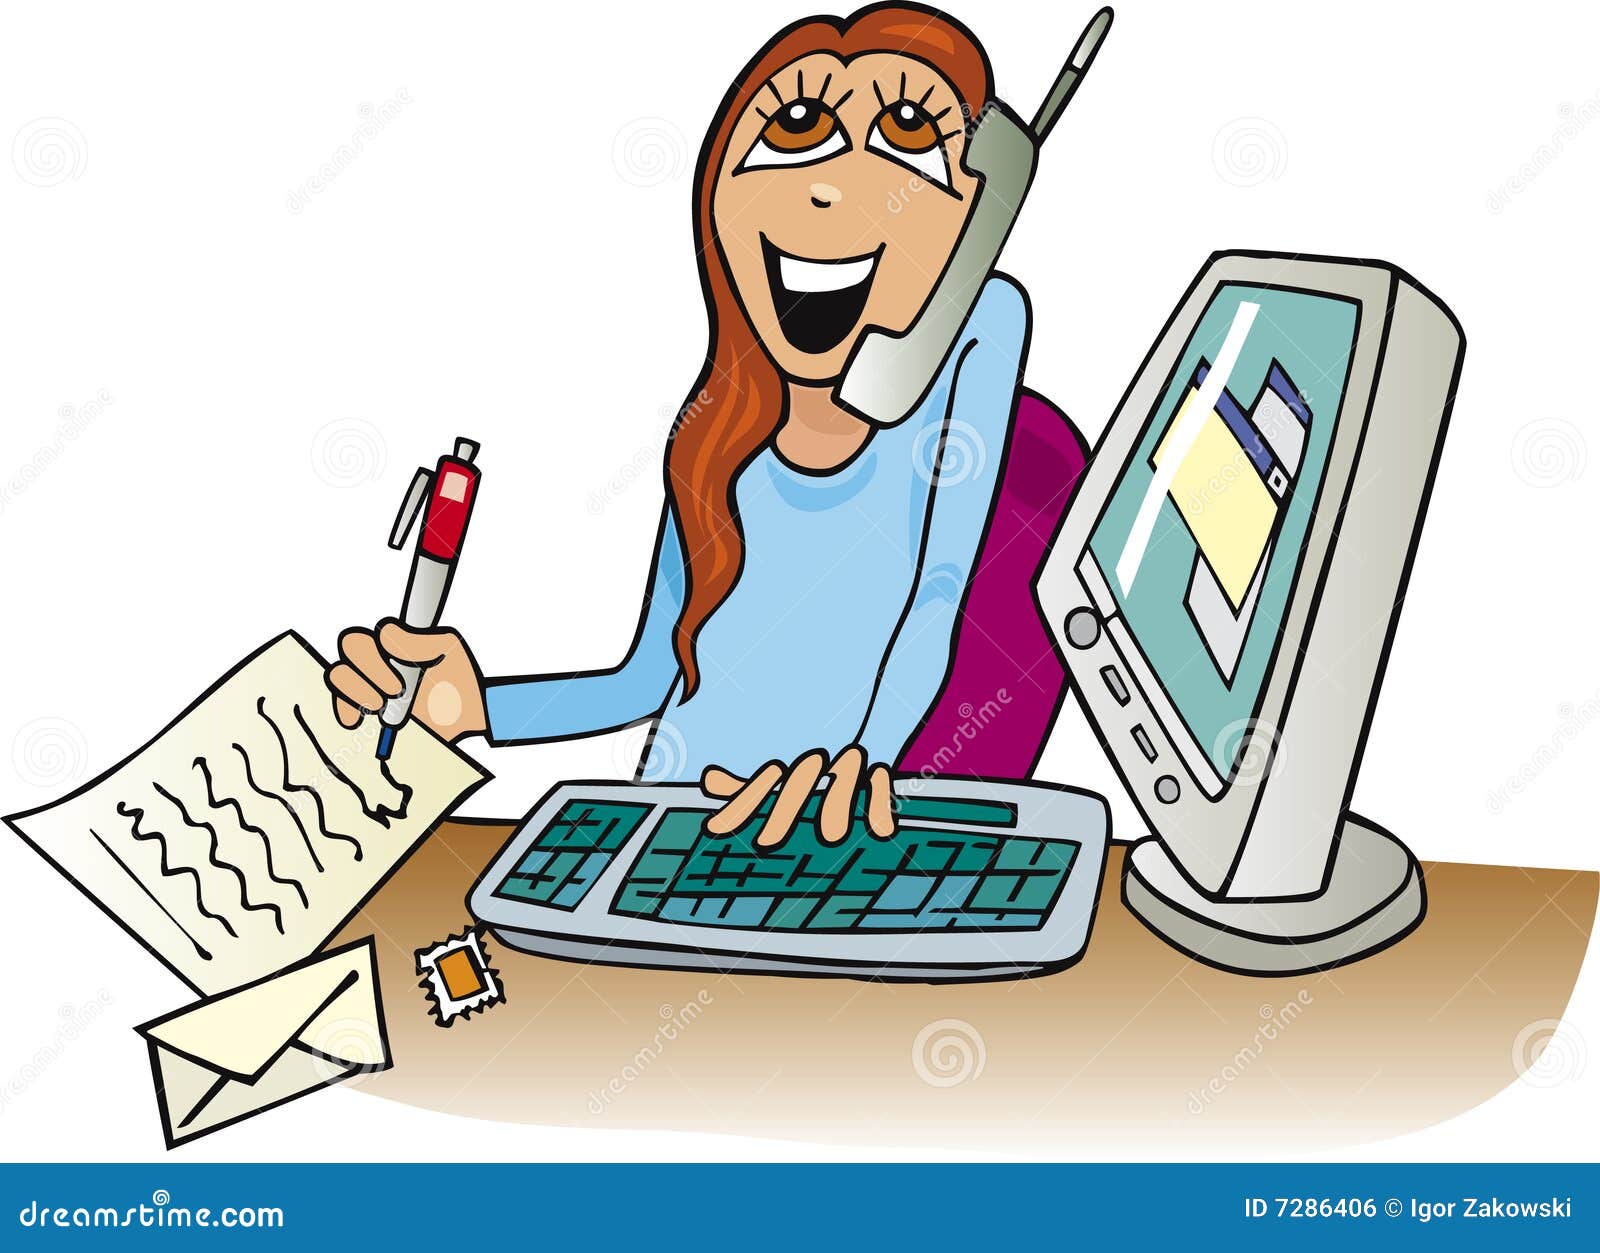 happy office worker clipart - photo #33